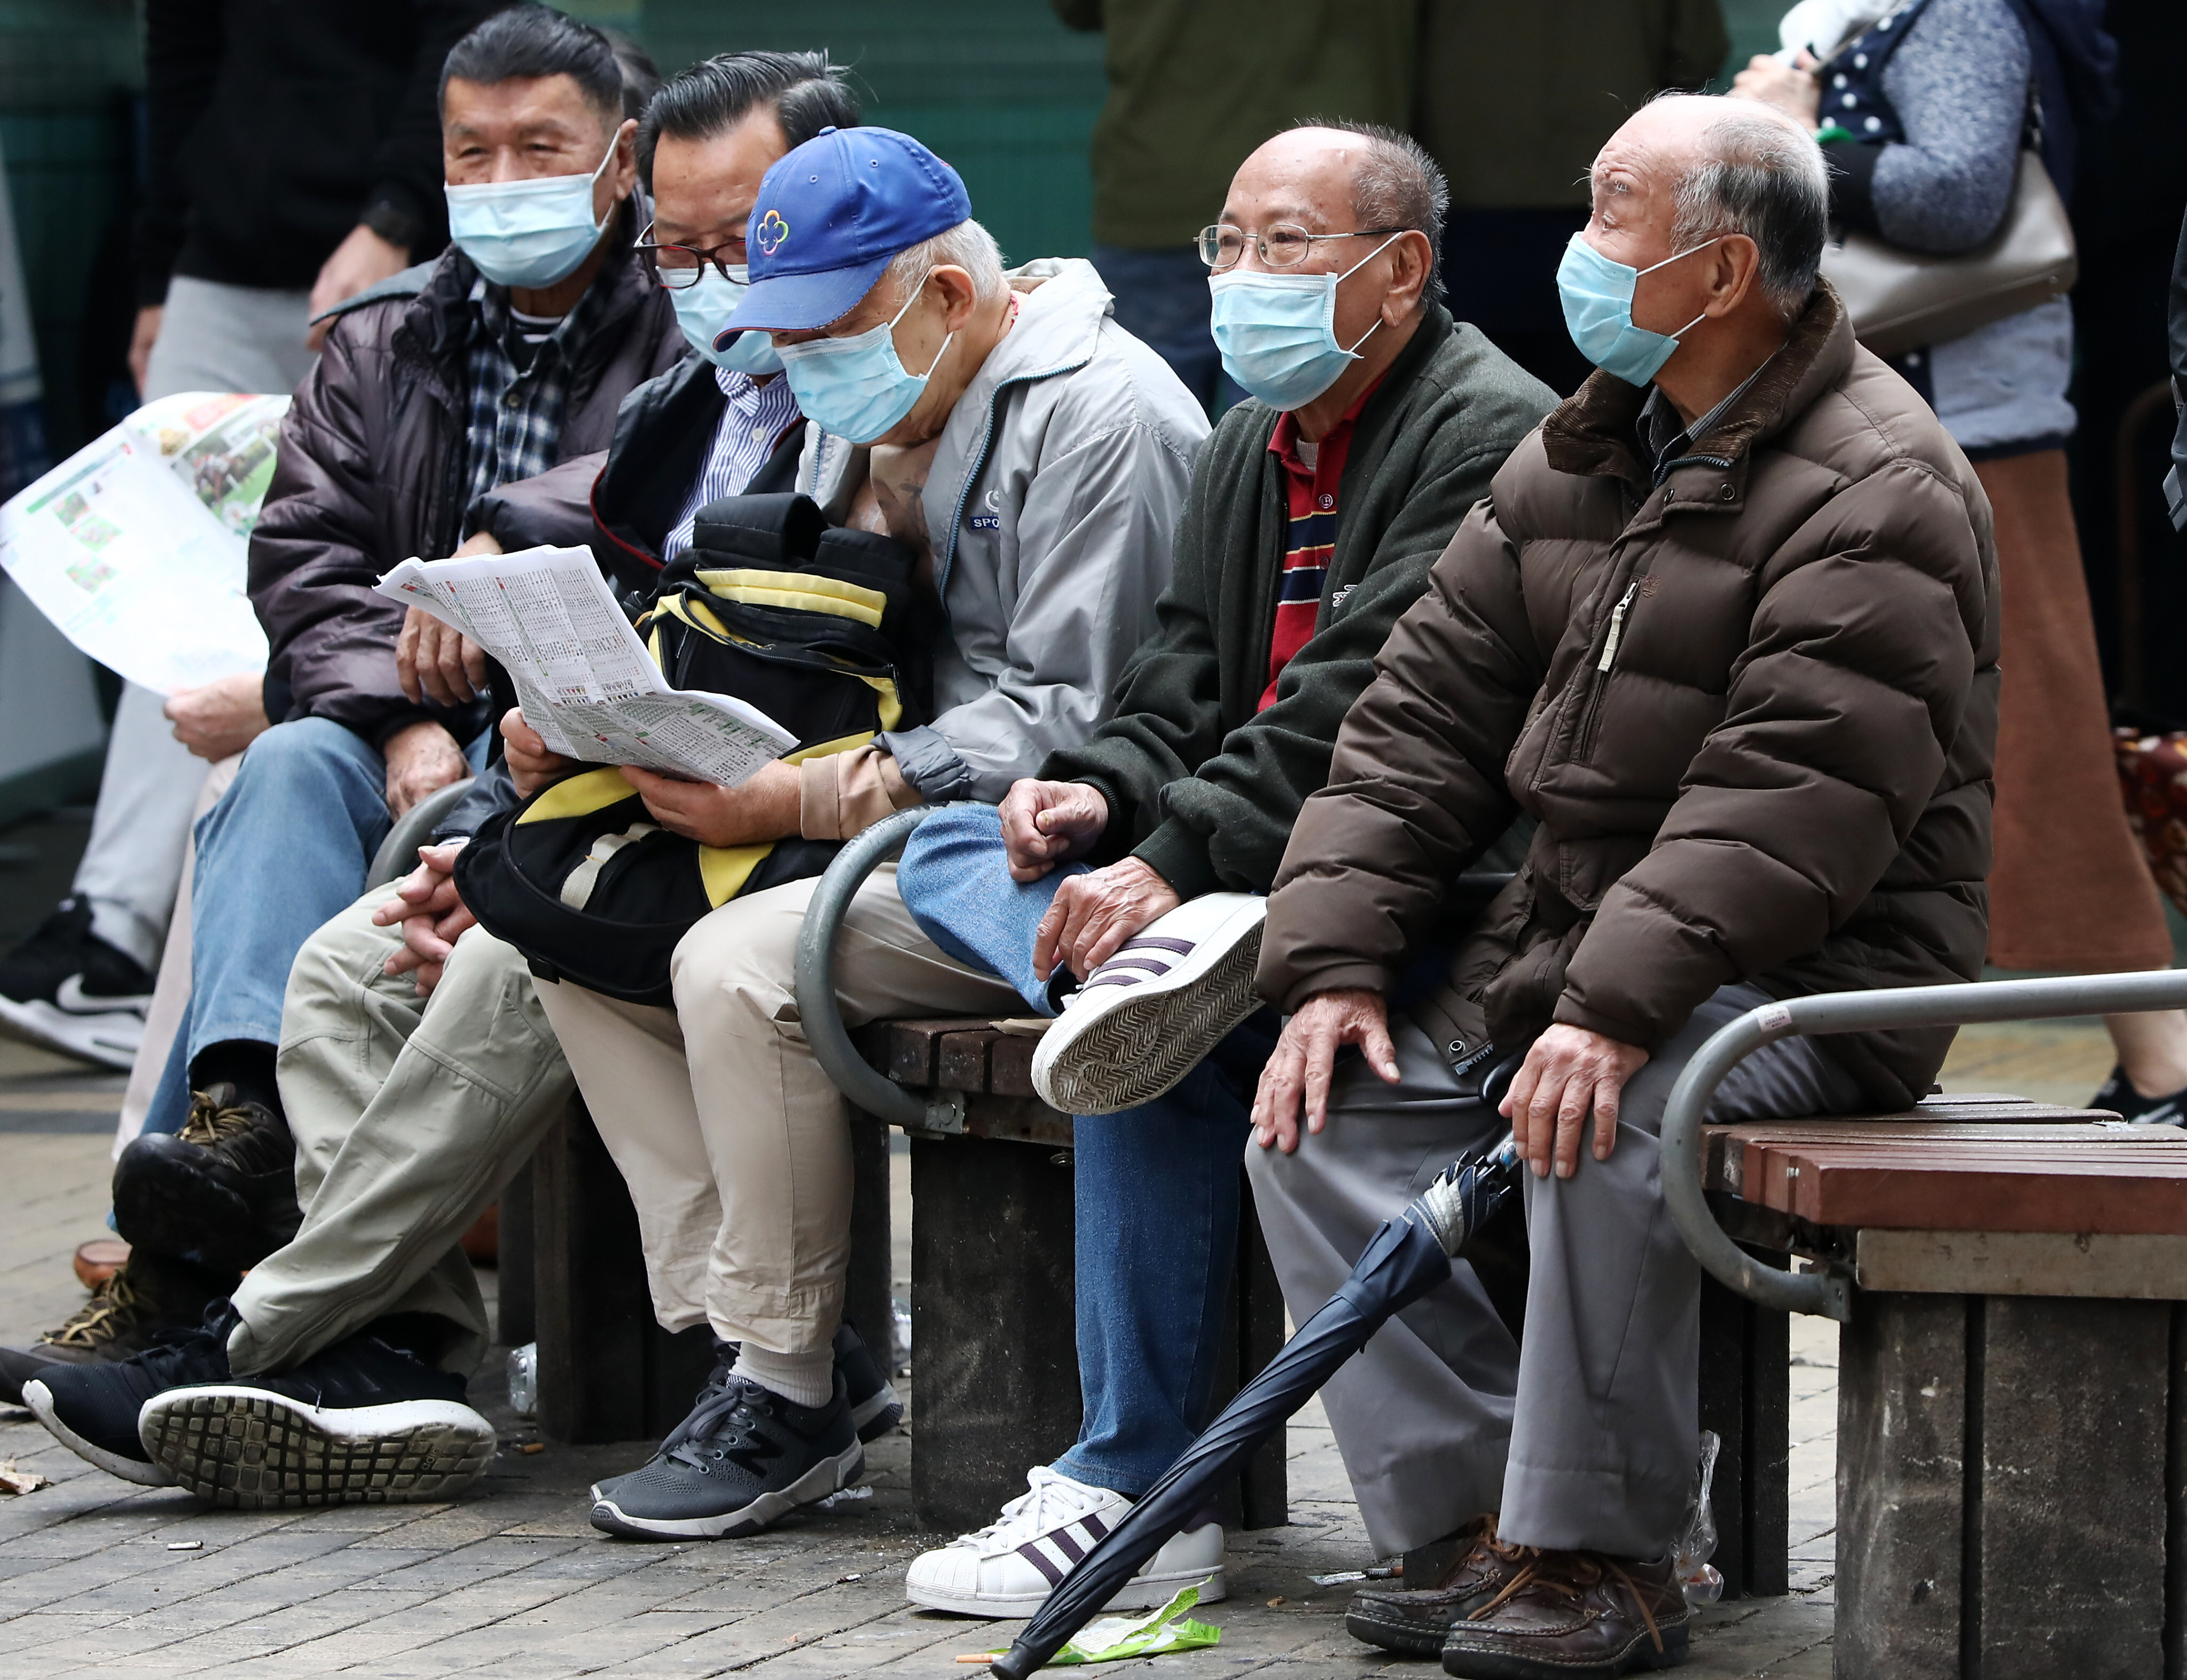 Elderly men sit on a bench in Sham Shui Po on December 23, 2020.  Surveys show the biggest concern for people in retirement is outliving their savings. Photo: Jonathan Wong